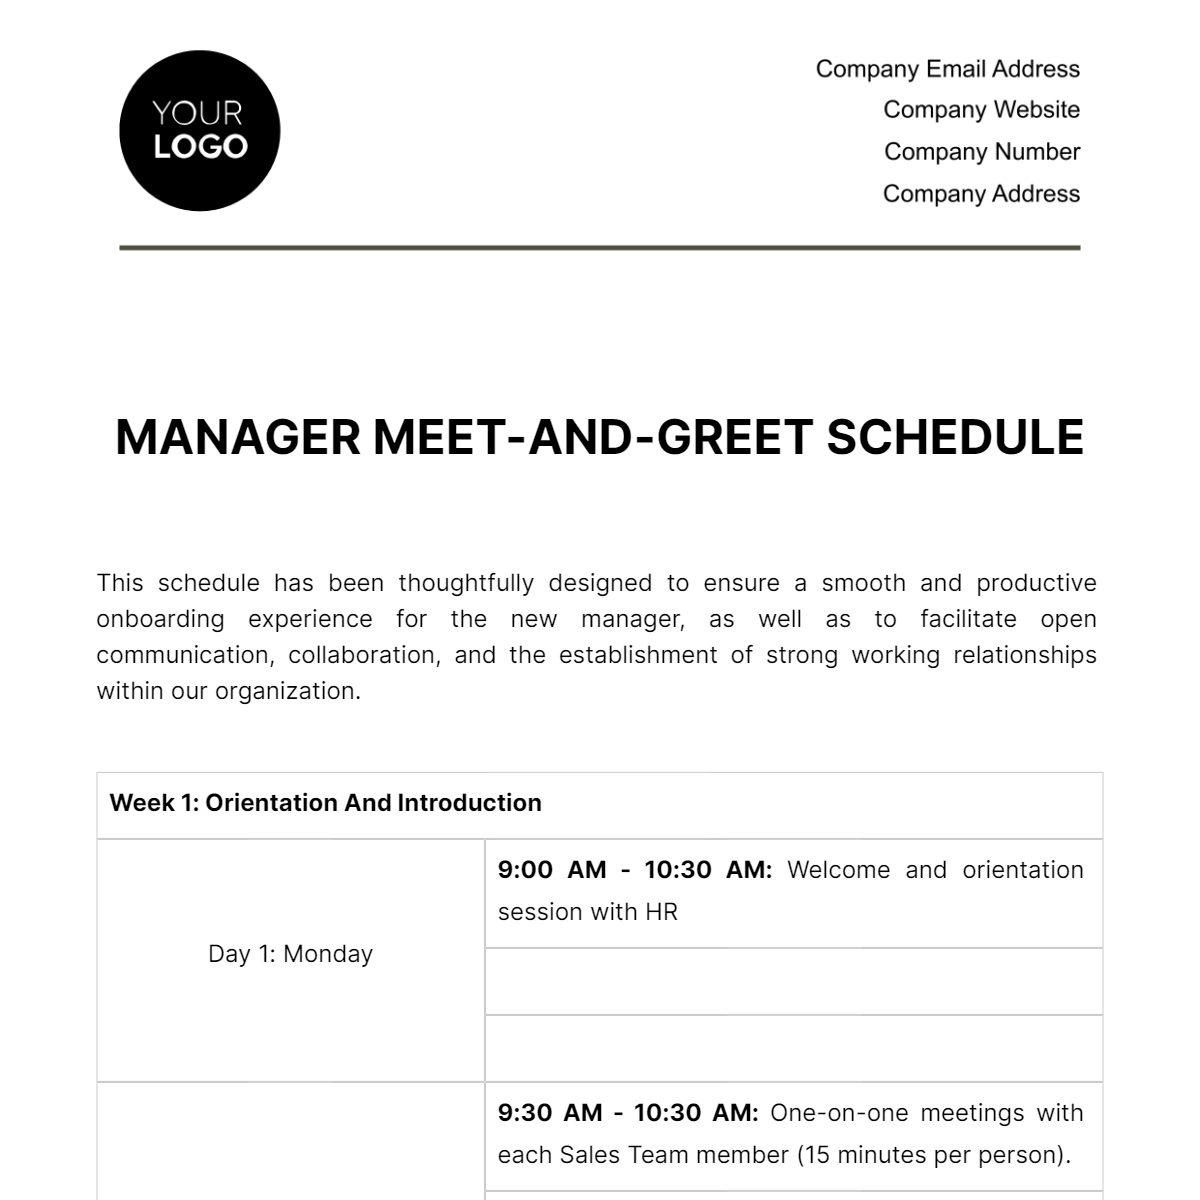 Free Manager Meet-and-Greet Schedule HR Template